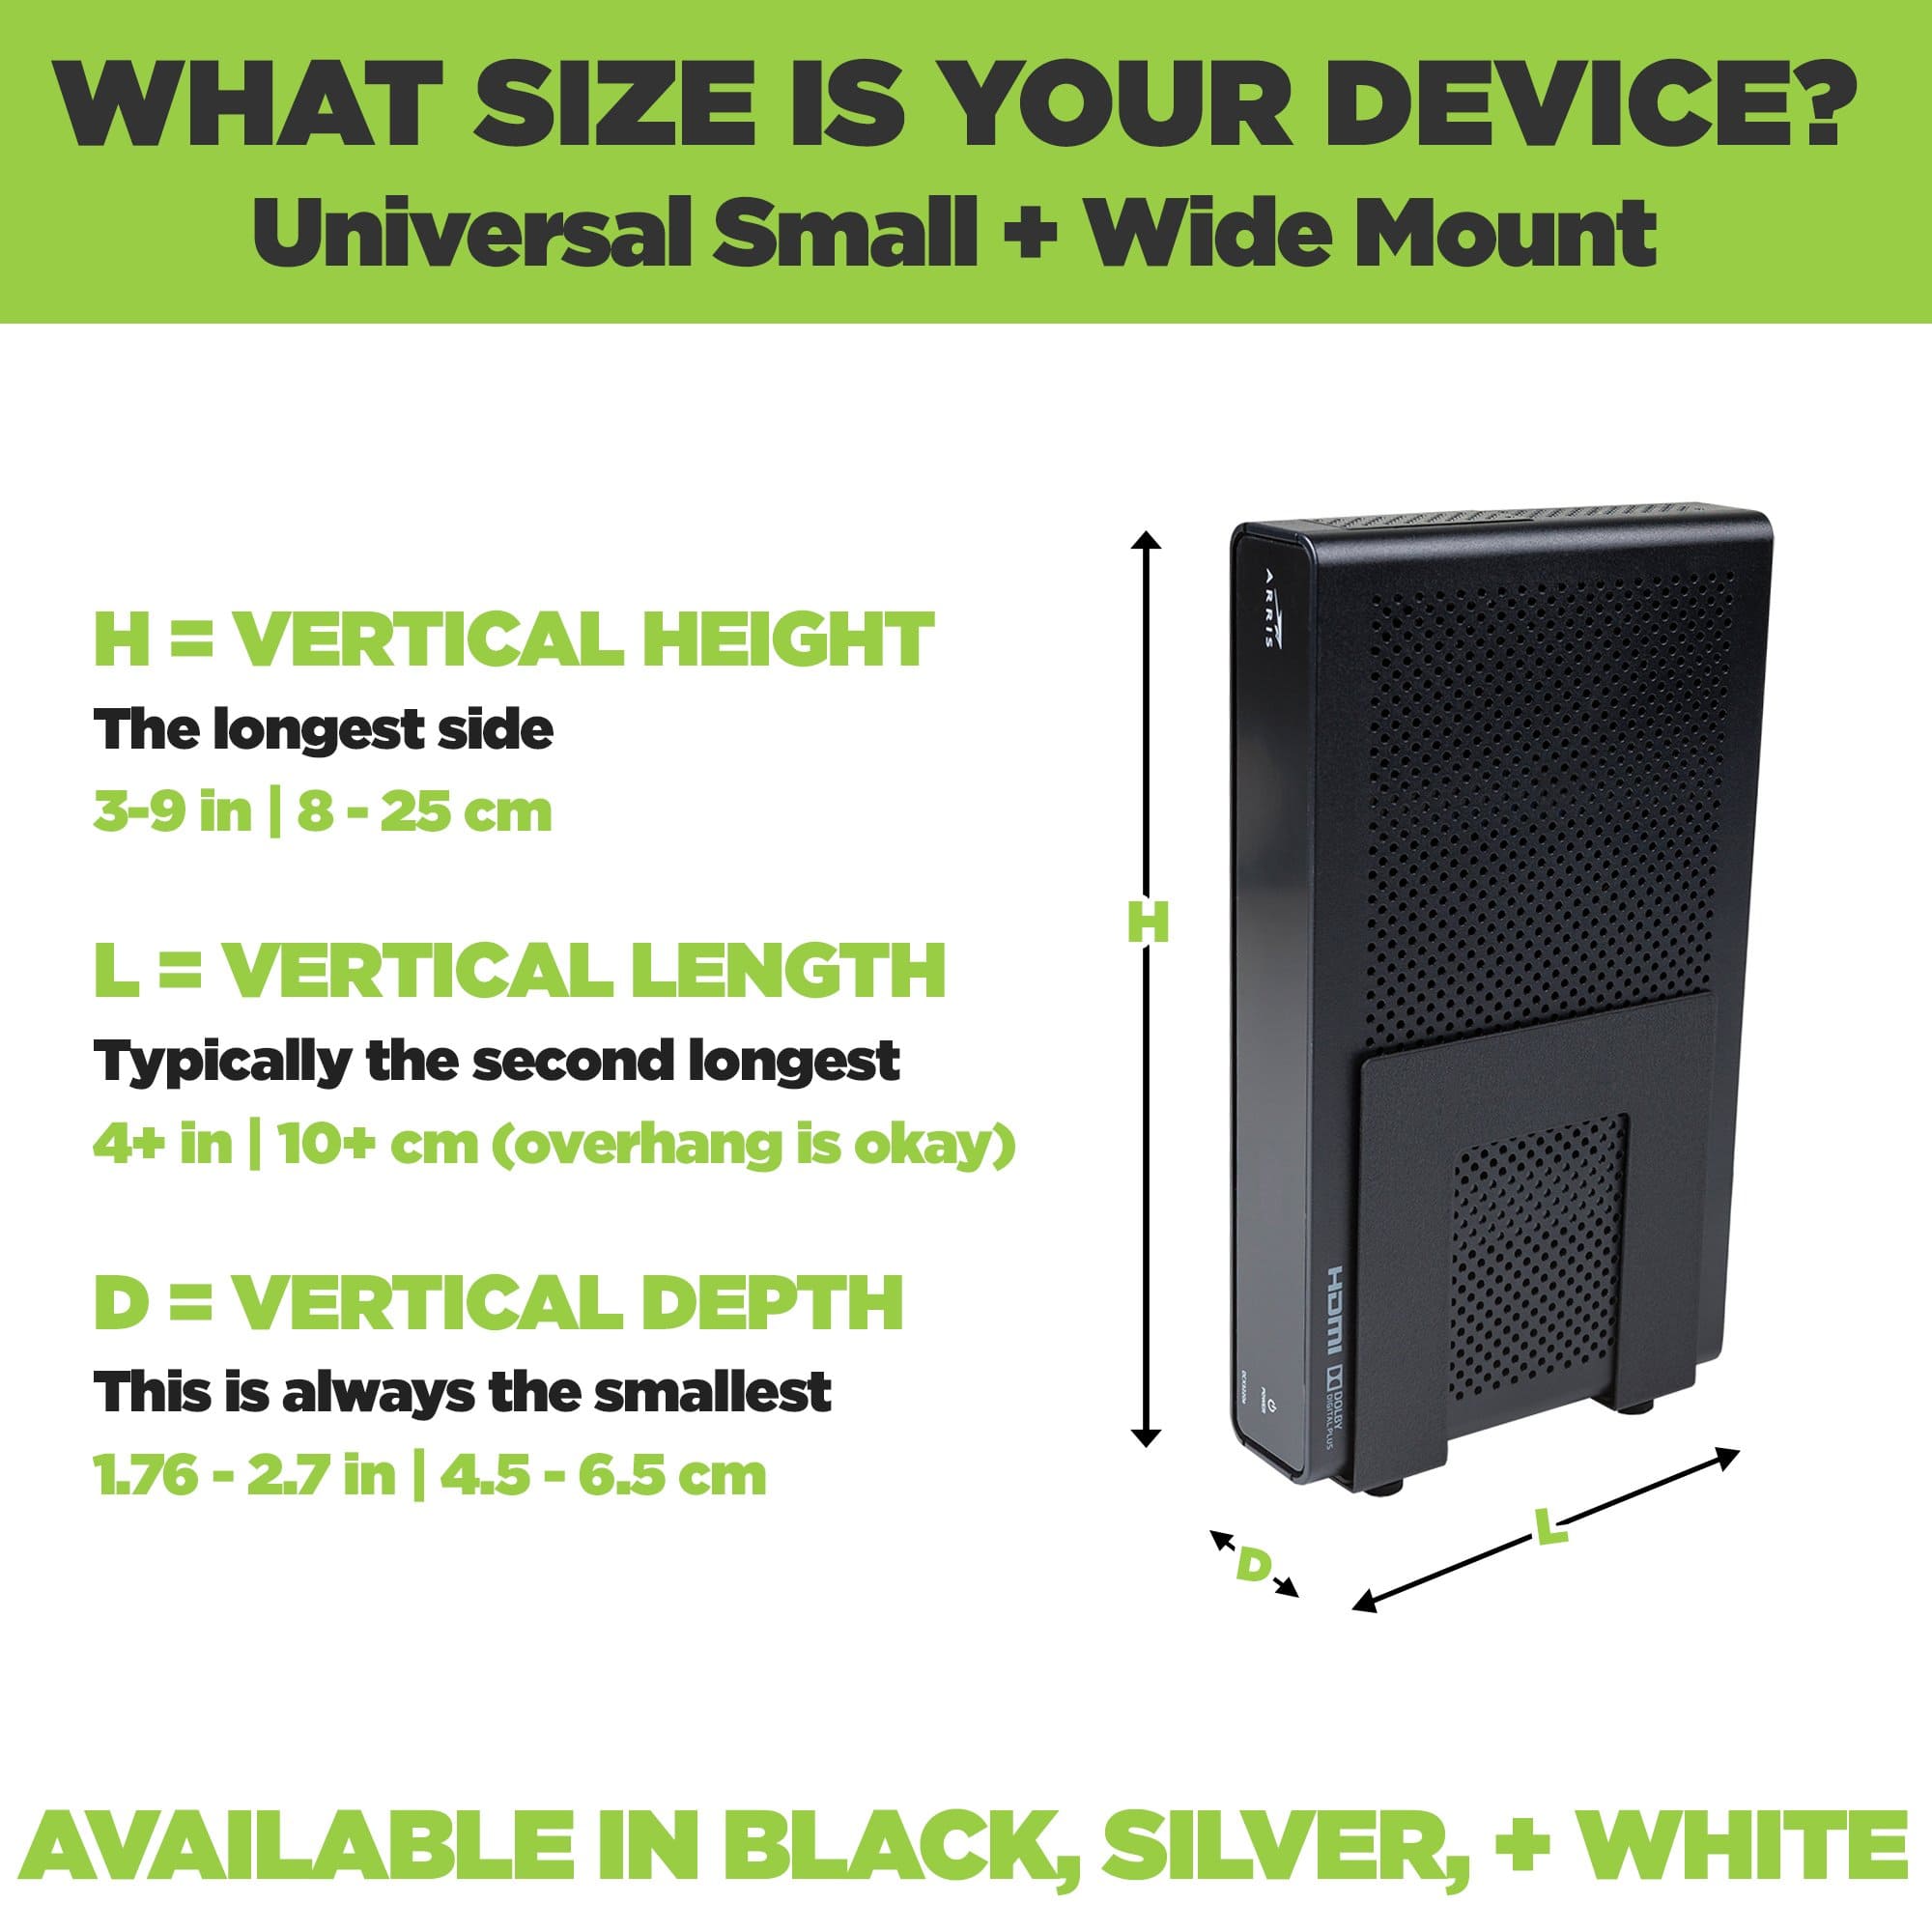 Small and Wide Device Mount adjust to fit a wide range of components including modems, routers and cable boxes.